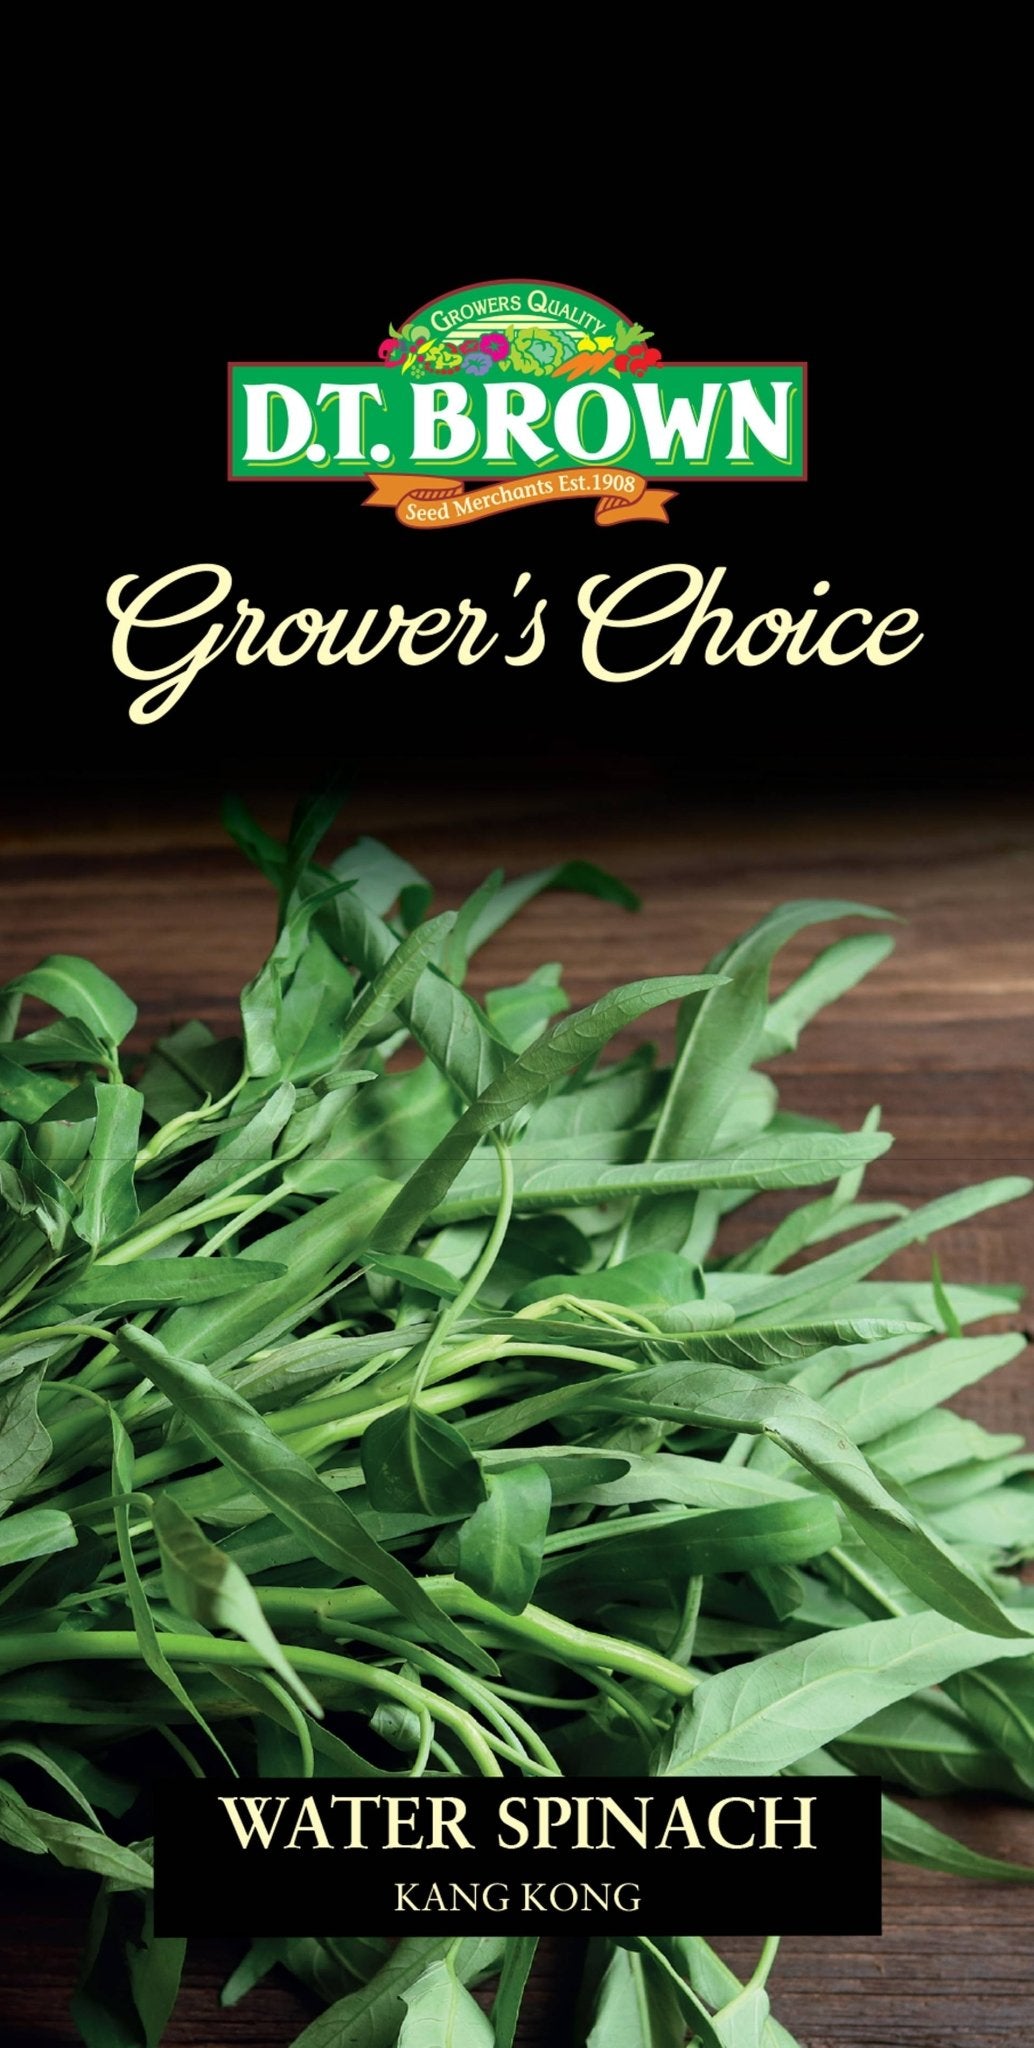 DT Brown Growers Choice Water Spinach - Woonona Petfood & Produce